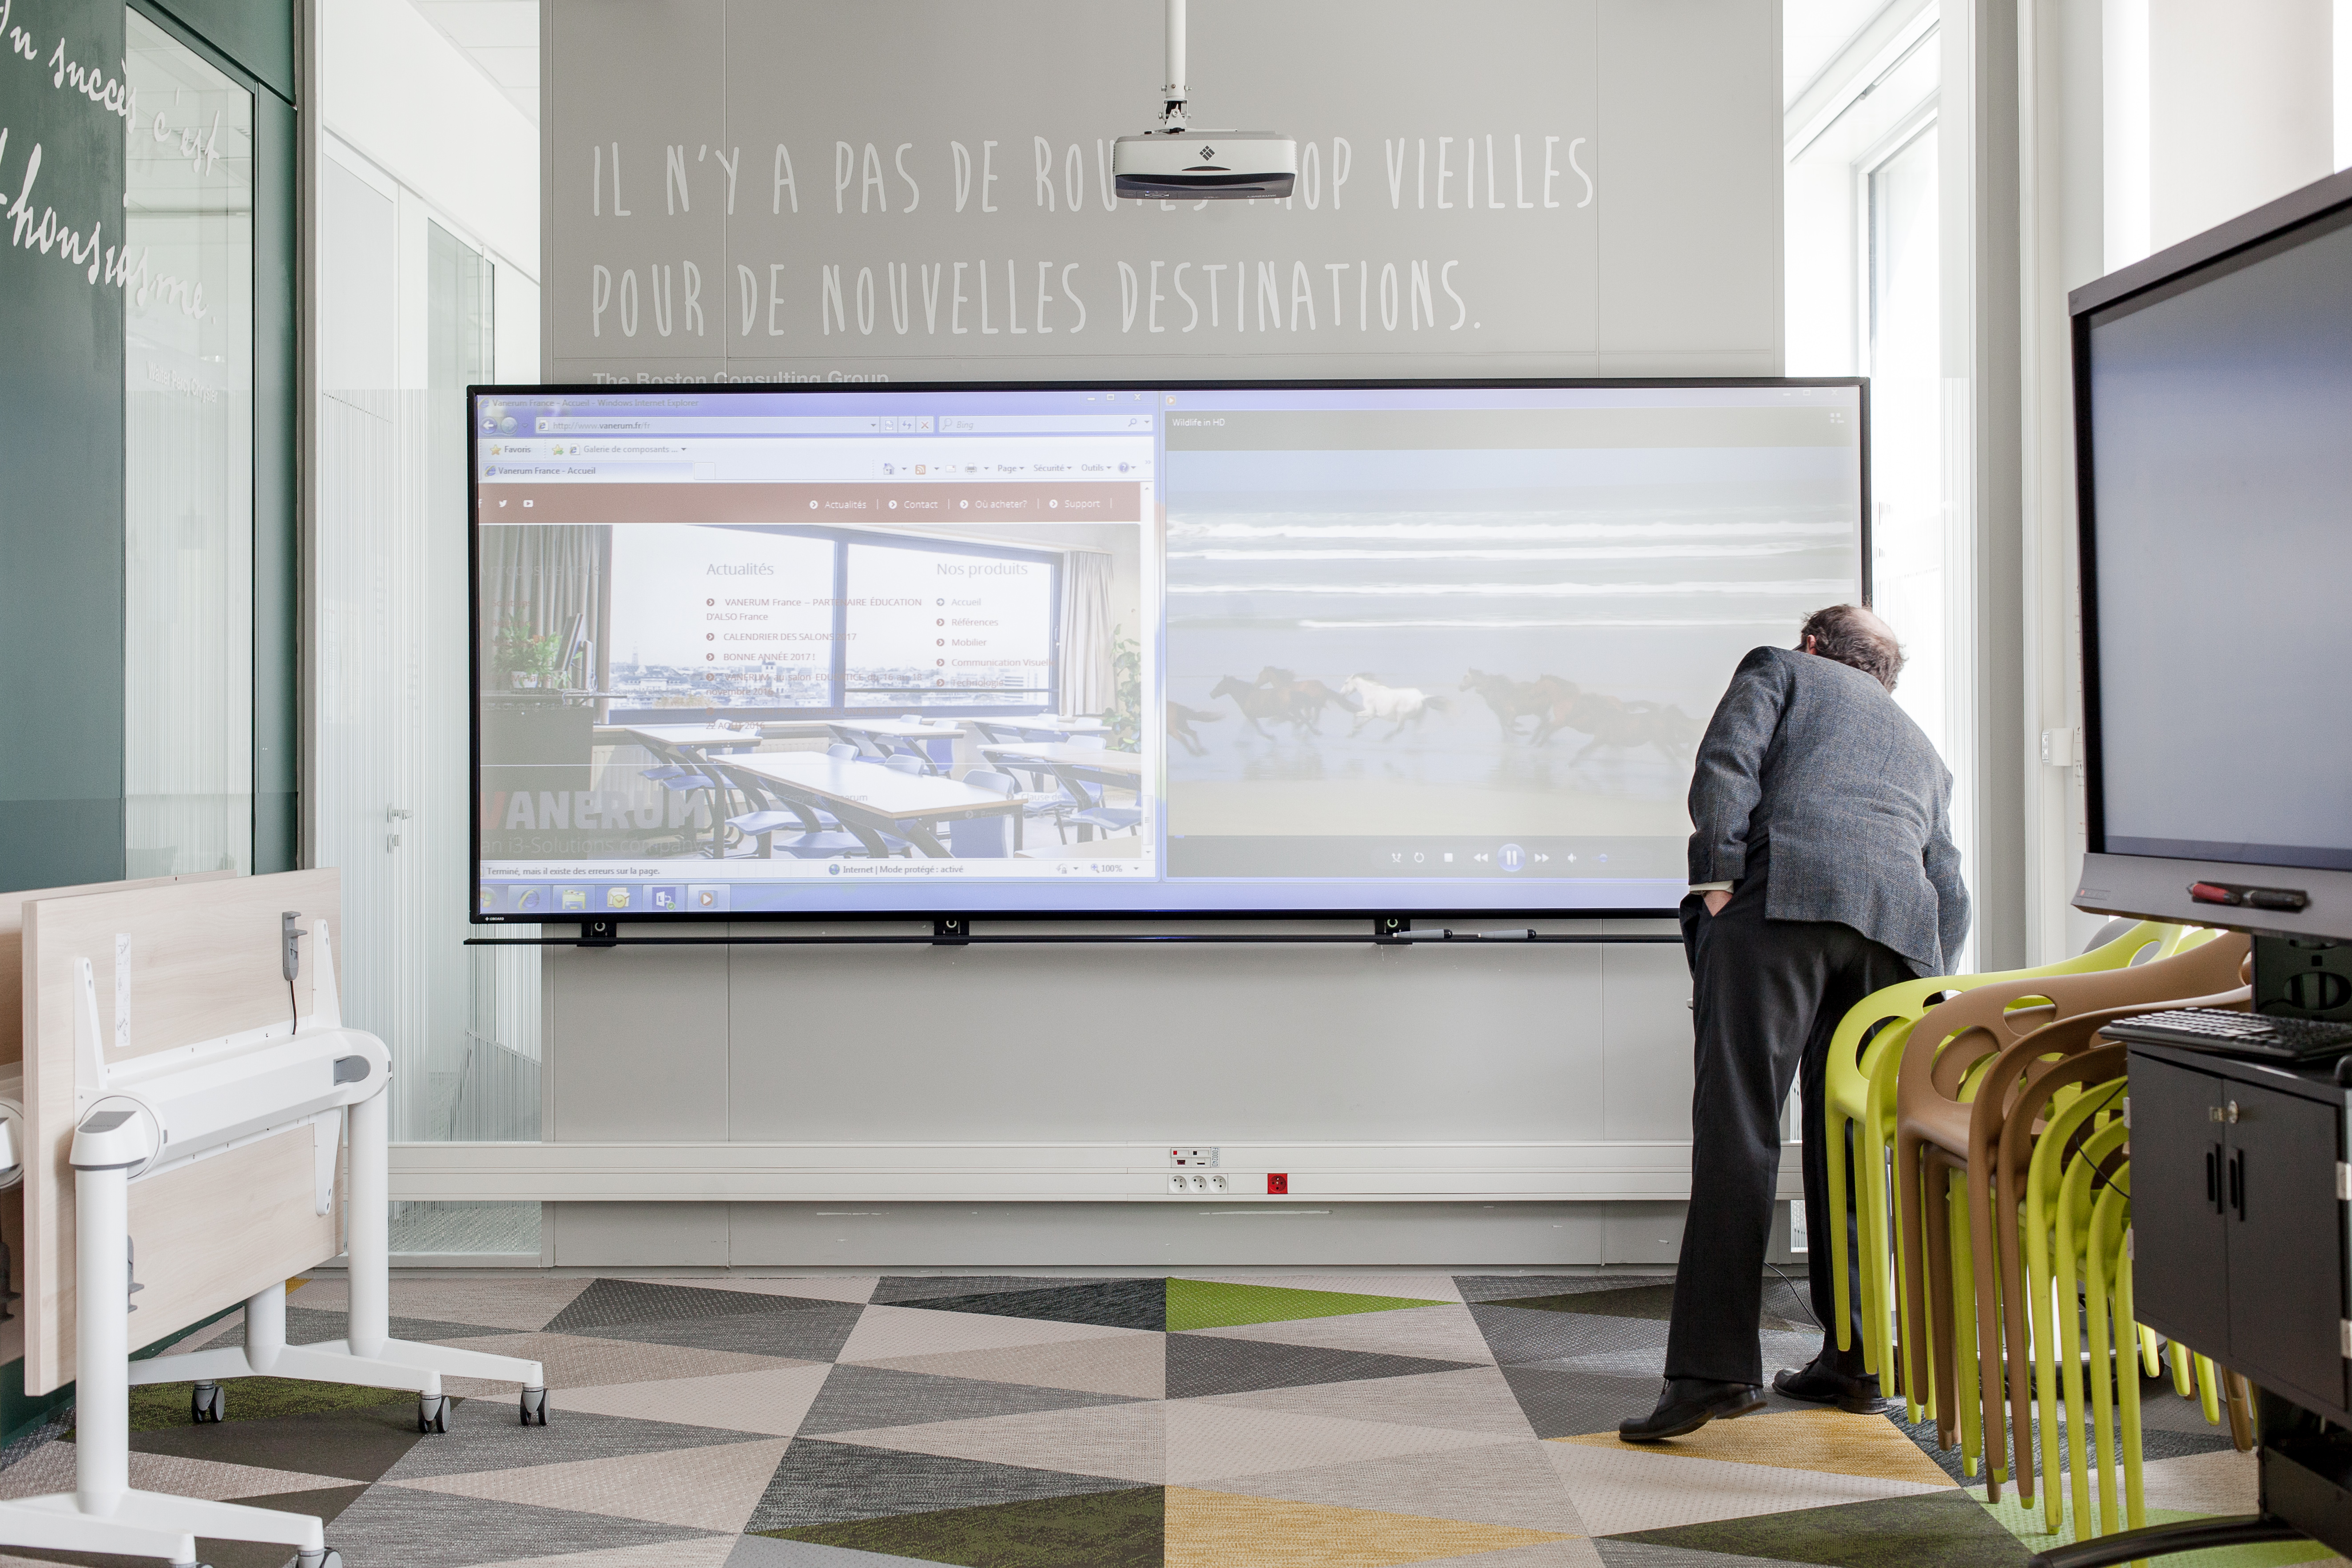 The i3BOARD is particularly used for the reception of new entrants because it allows to present the company by simultaneously displaying videos and organizational charts and key figures that can be annotated digitally.